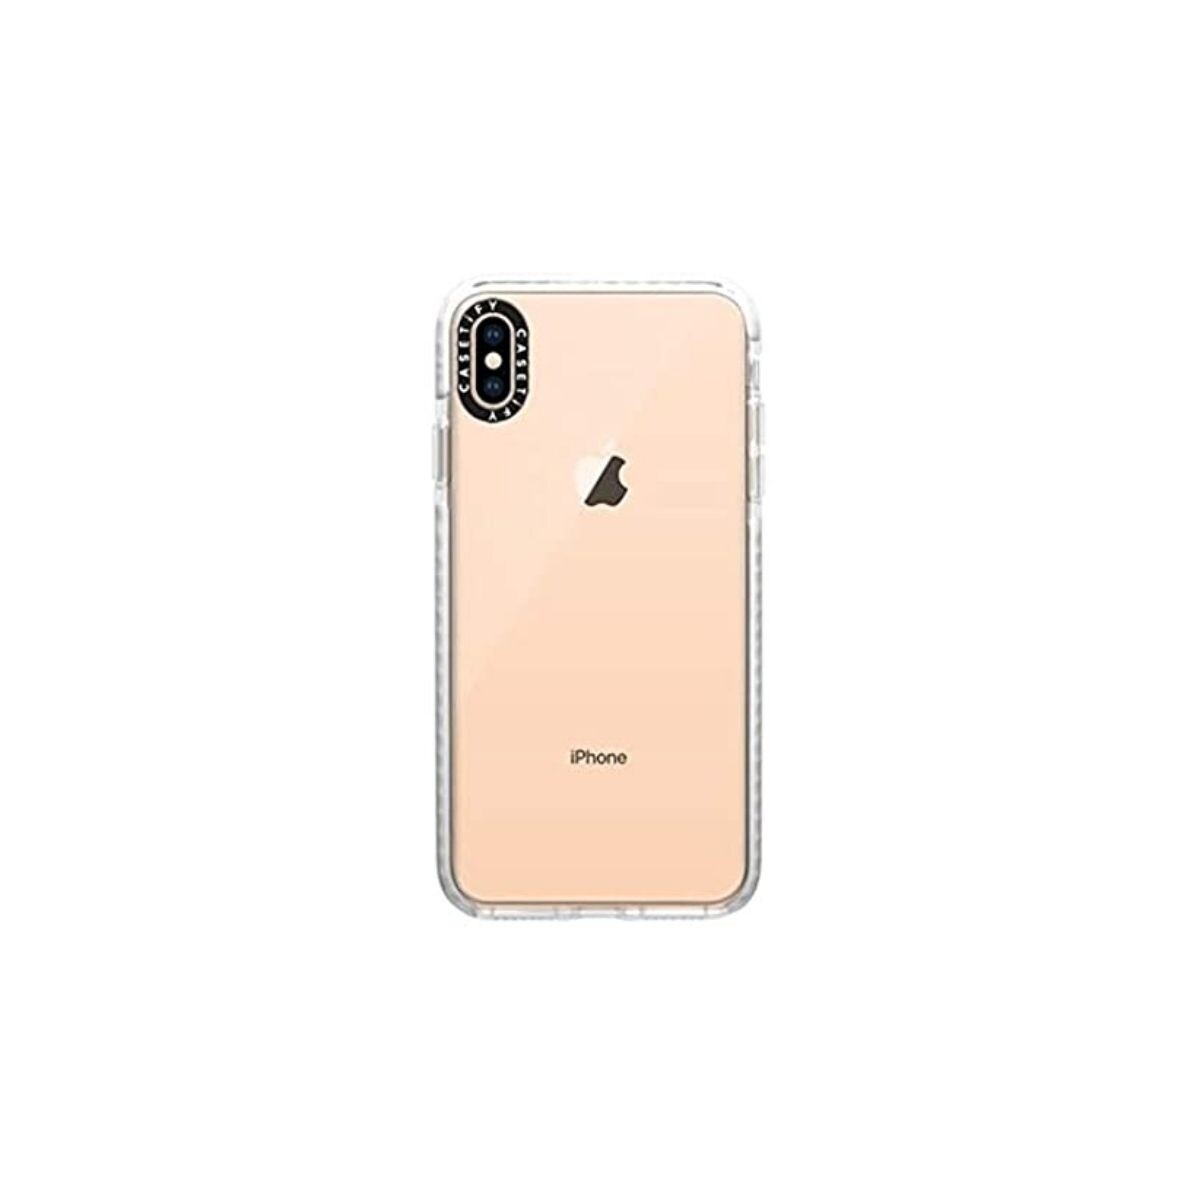 Protector Casetify Para Iphone X y XS 